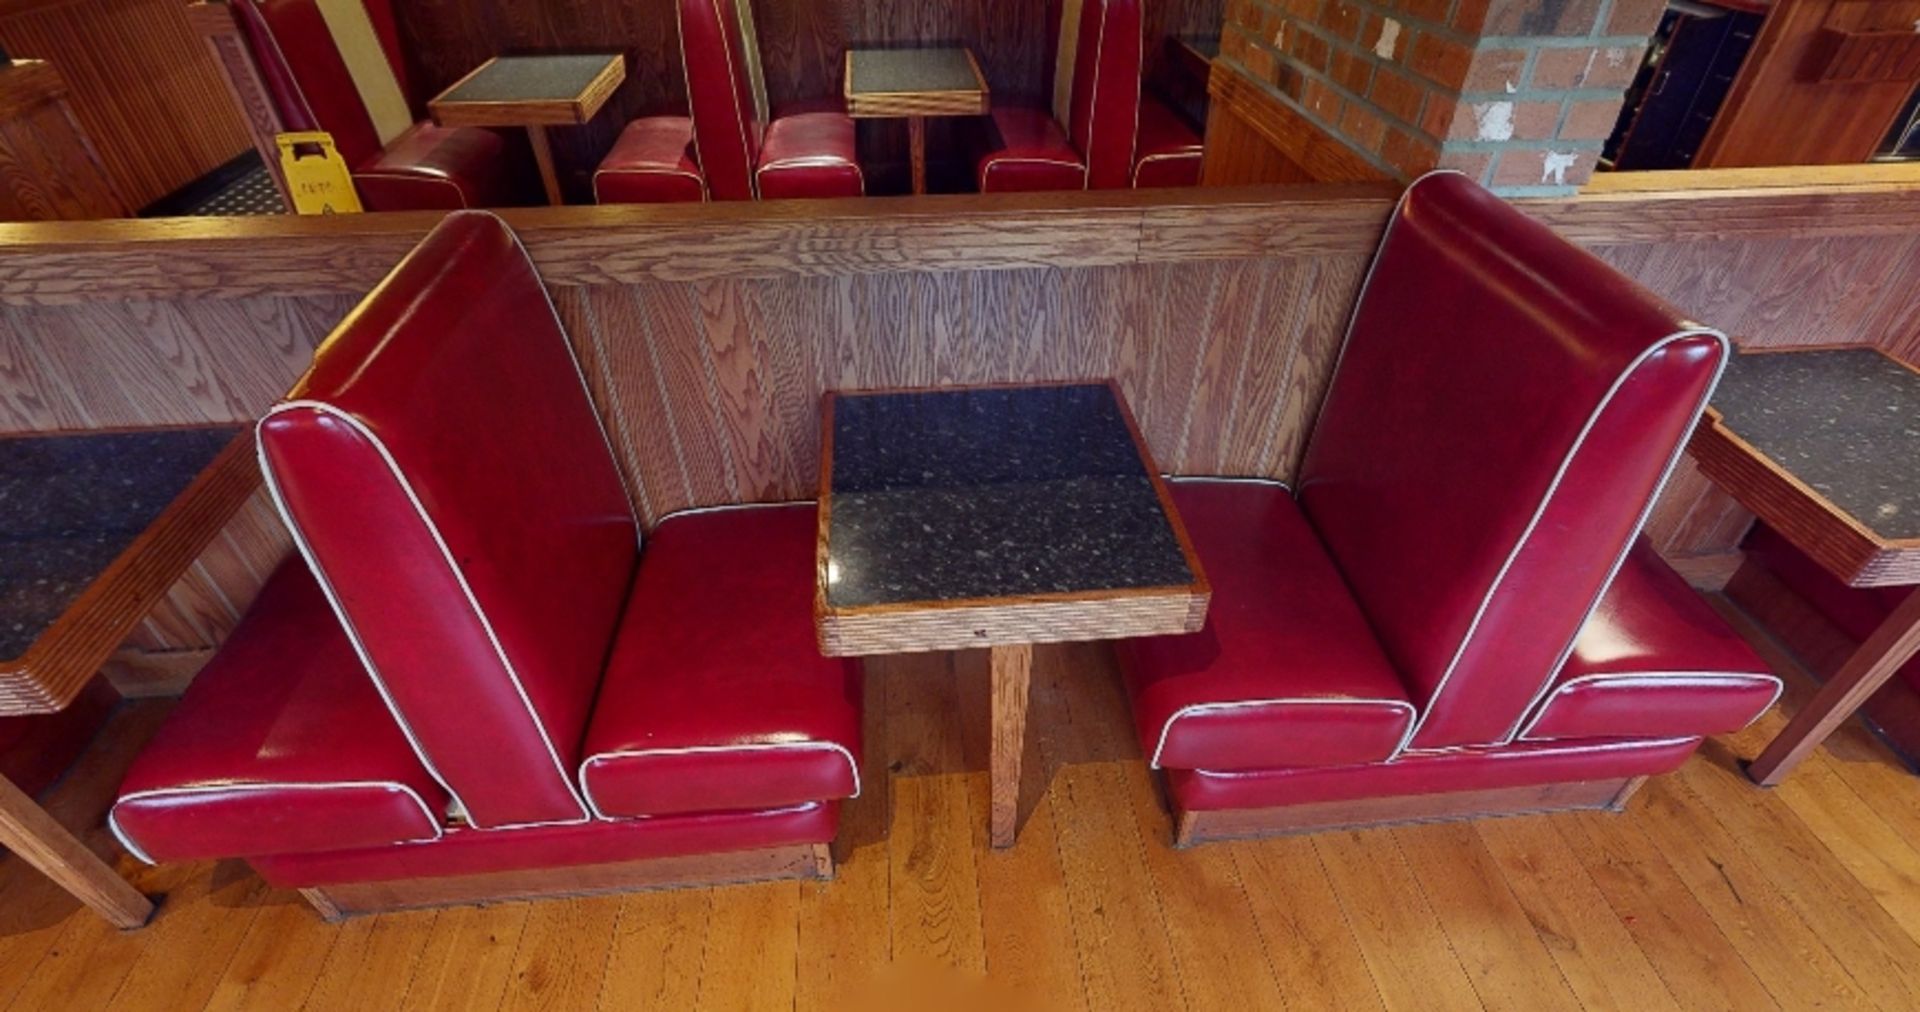 Selection of Single Seating Benches and Dining Tables to Seat Upto 10 Persons - Retro - 1950's - Image 3 of 6